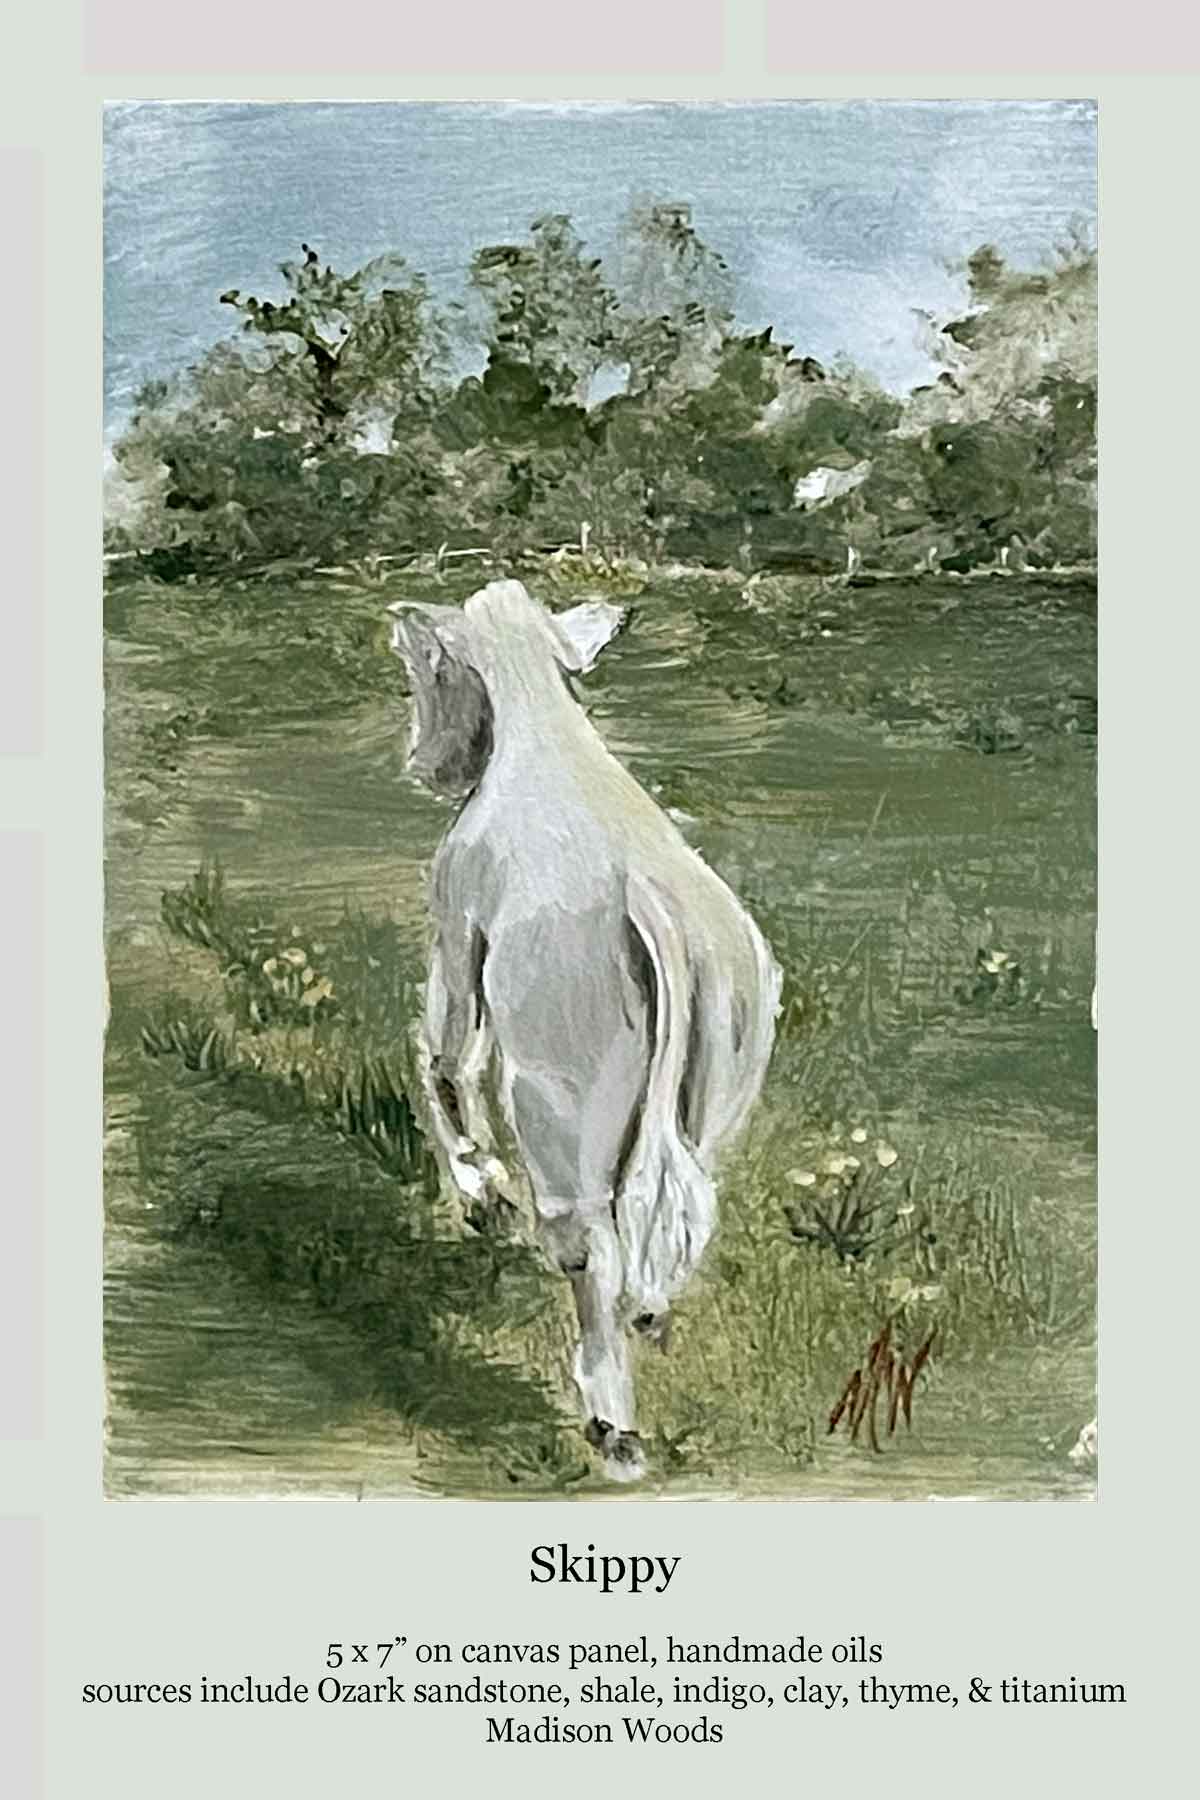 A painting of a white calf by Madison Woods.